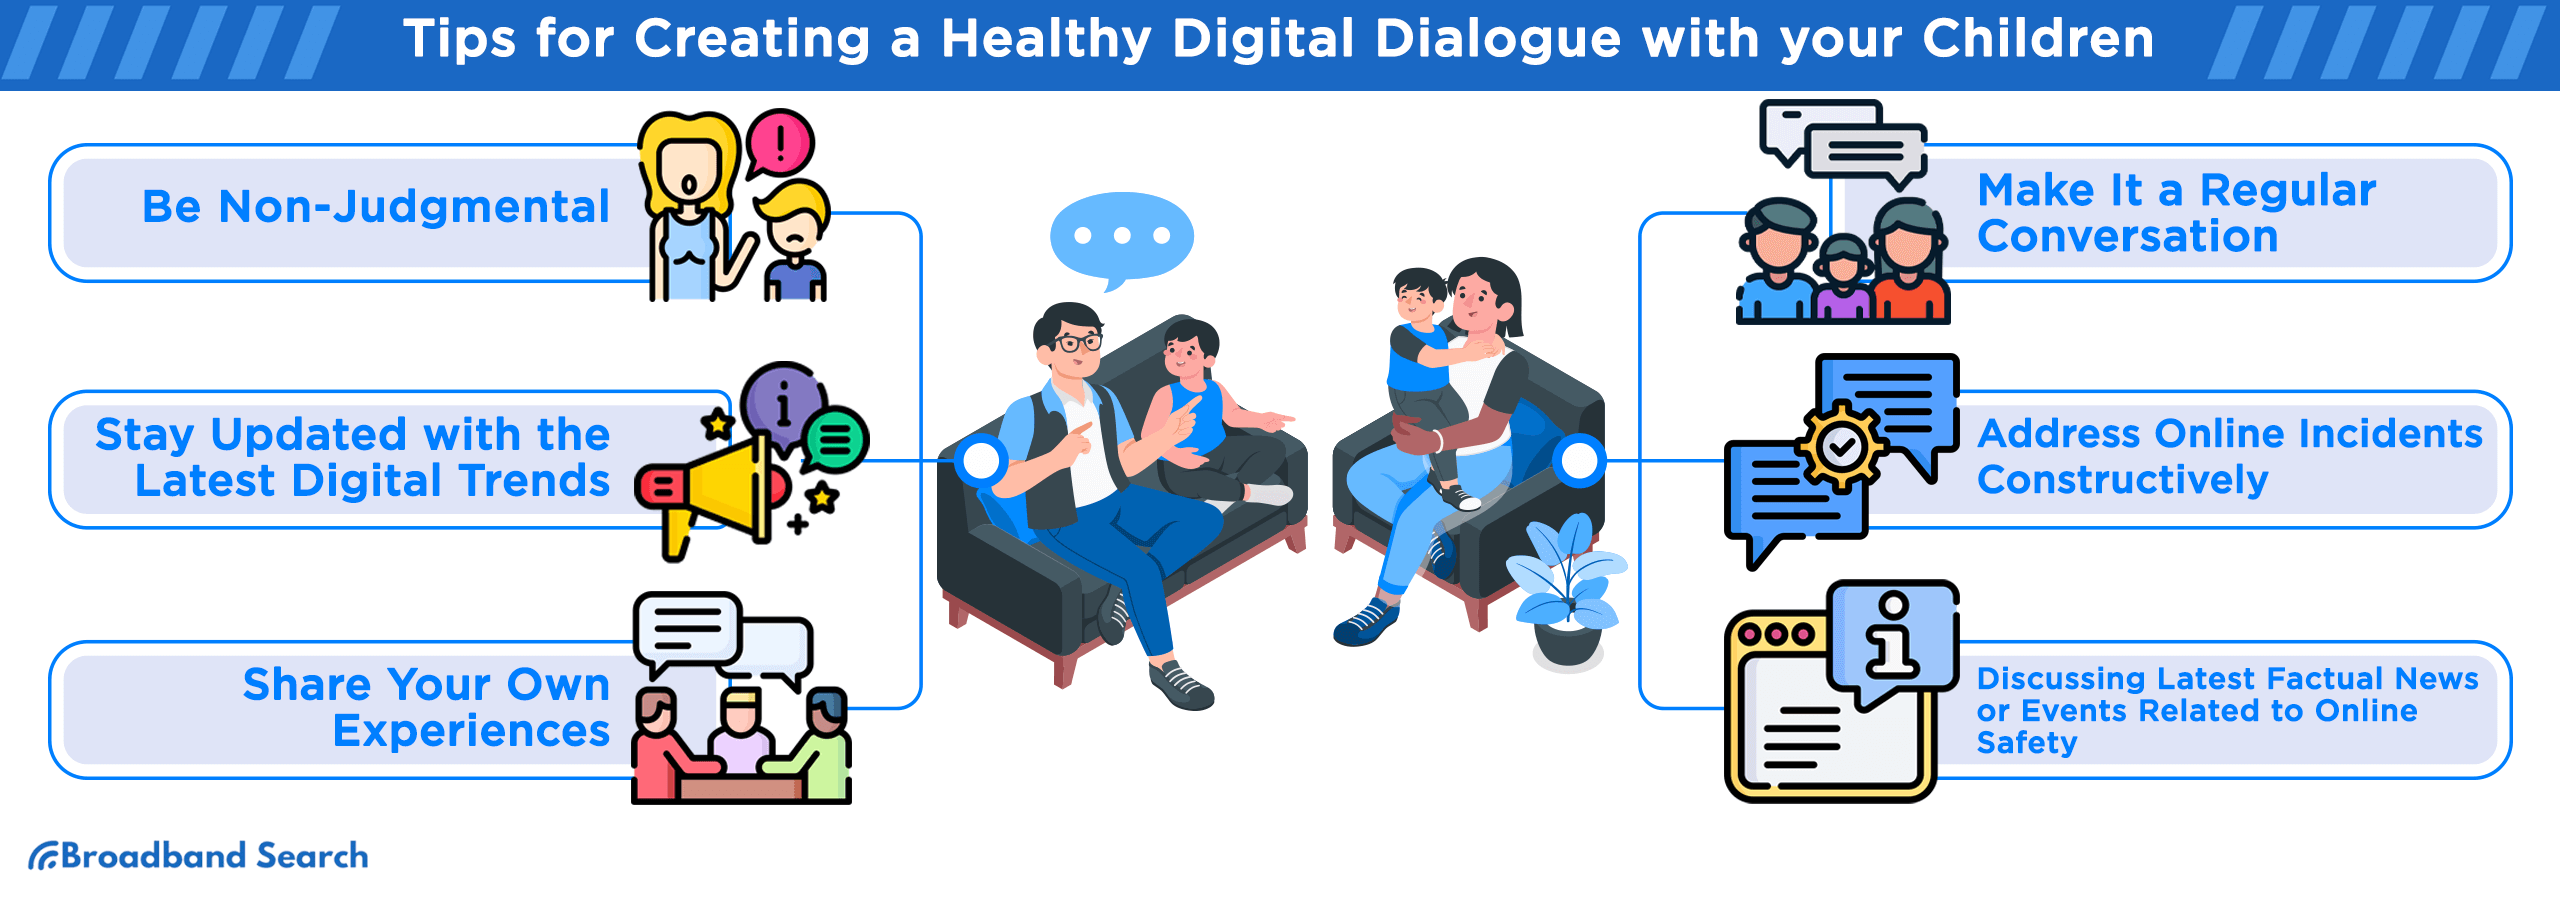 Tips for creating a healthy digital dialogue with your children